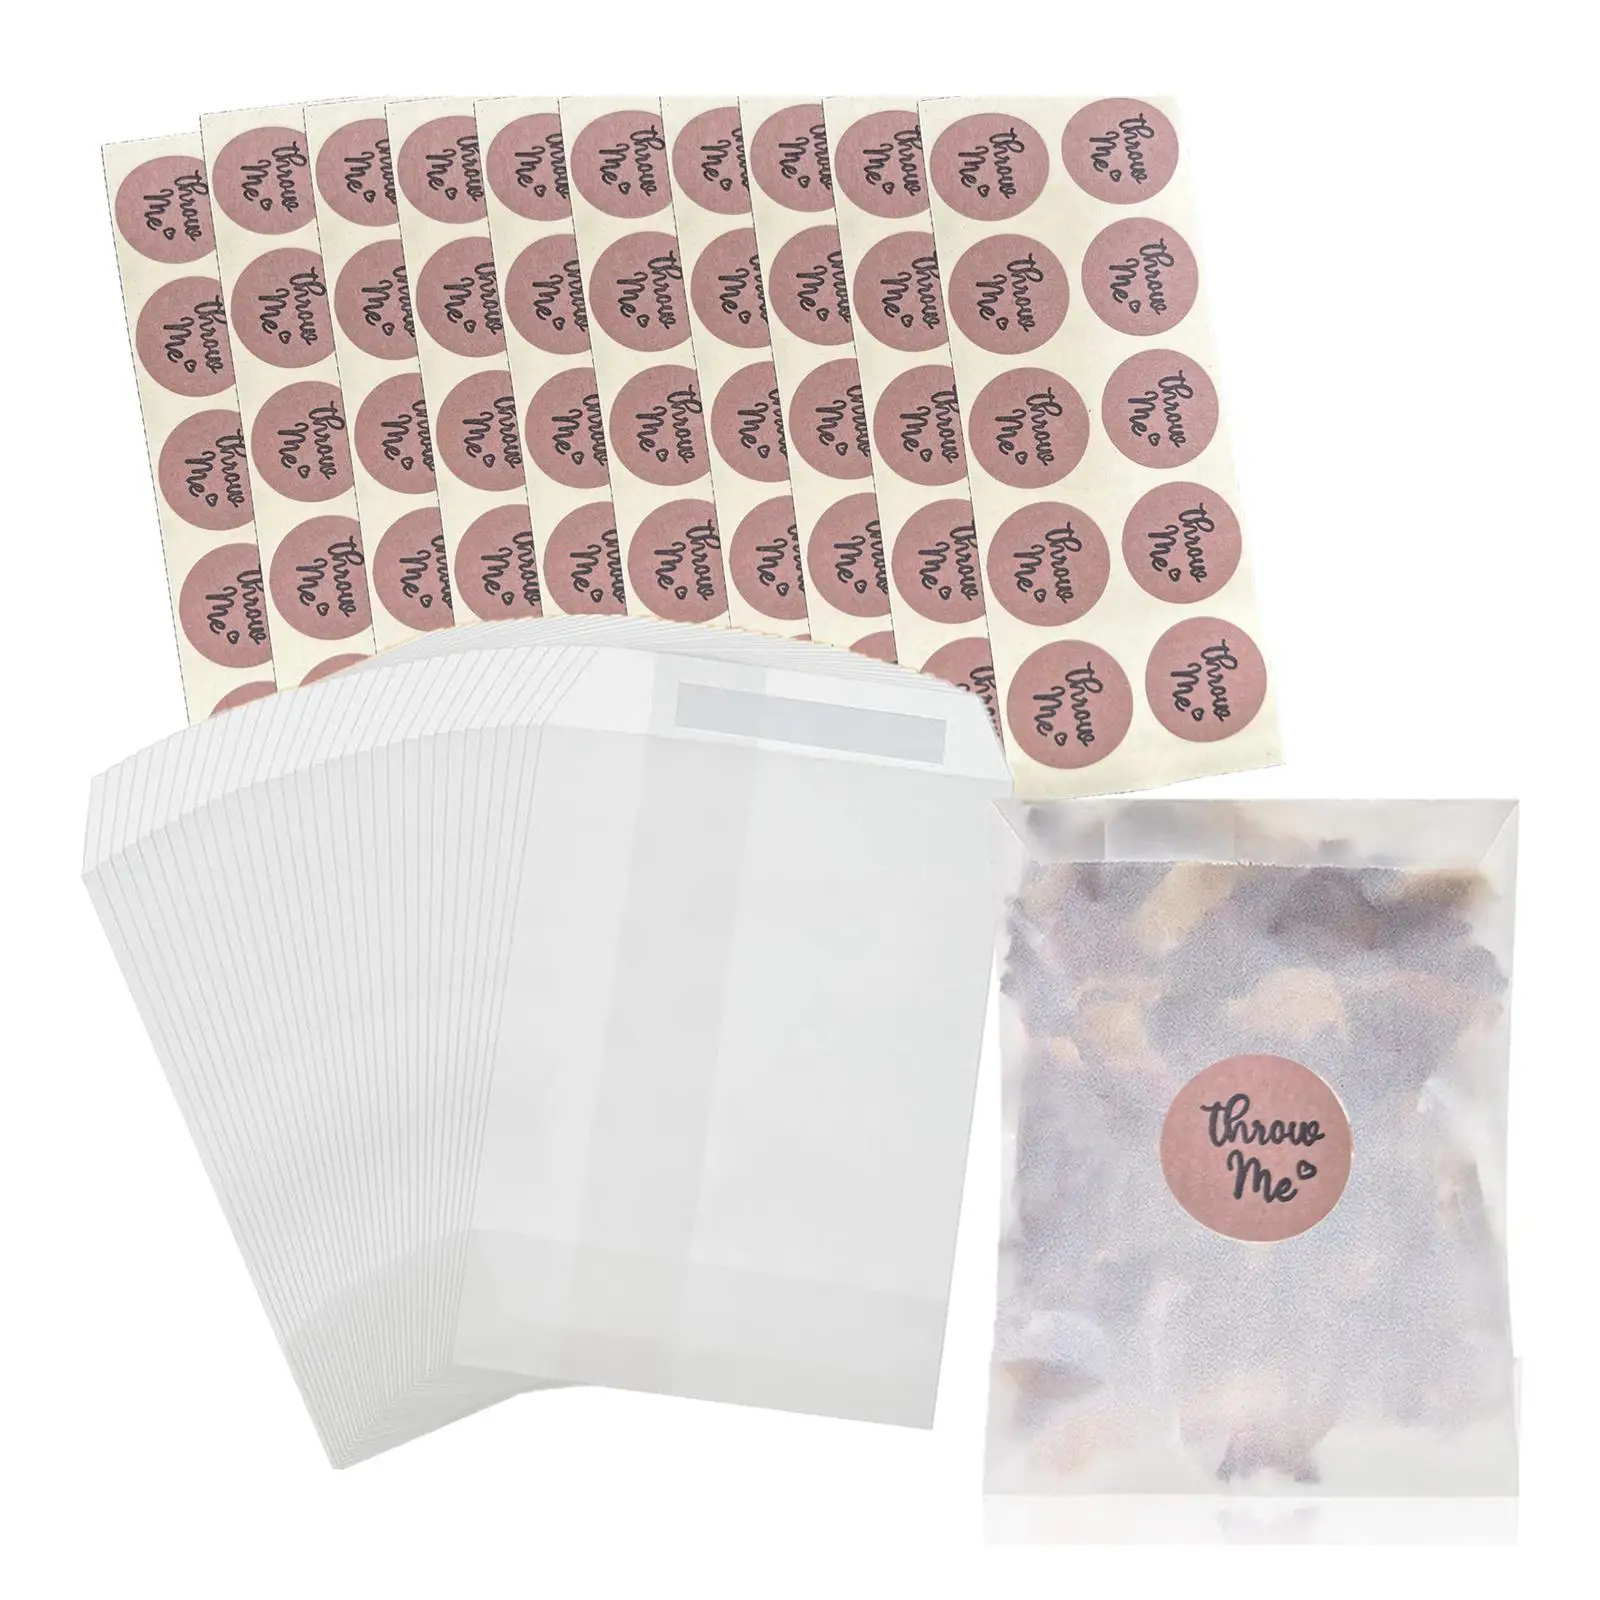 100Pcs Confetti Bags with Stickers Multipurpose Wedding Favor Bags for Chocolate Petals Invitations Treats Birthday Parties